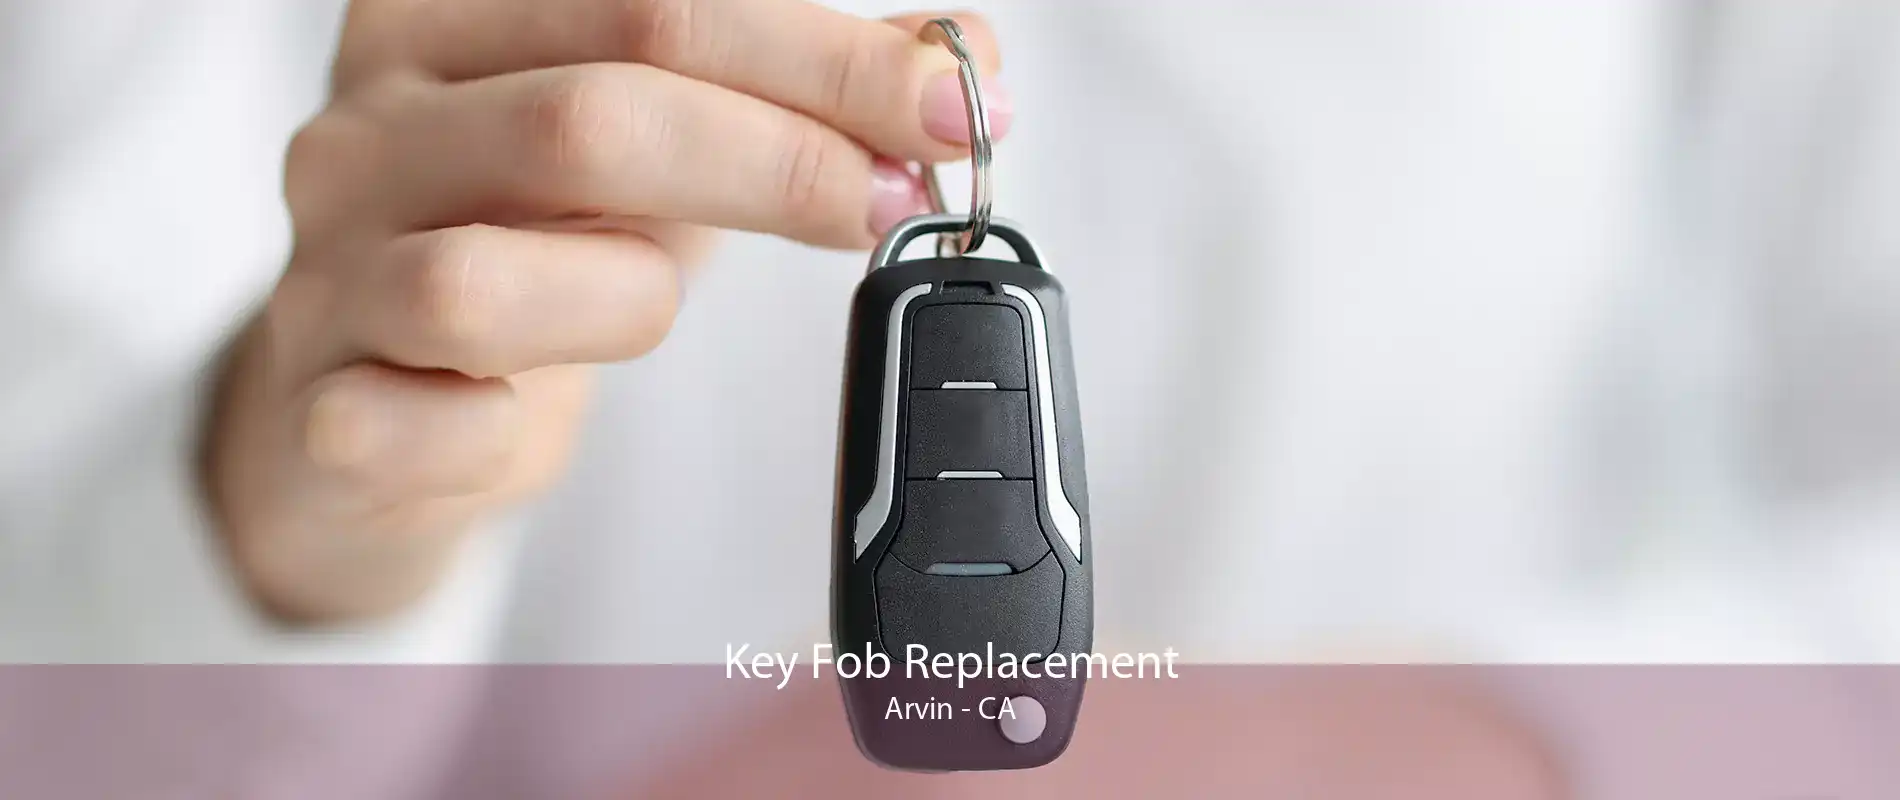 Key Fob Replacement Arvin - CA